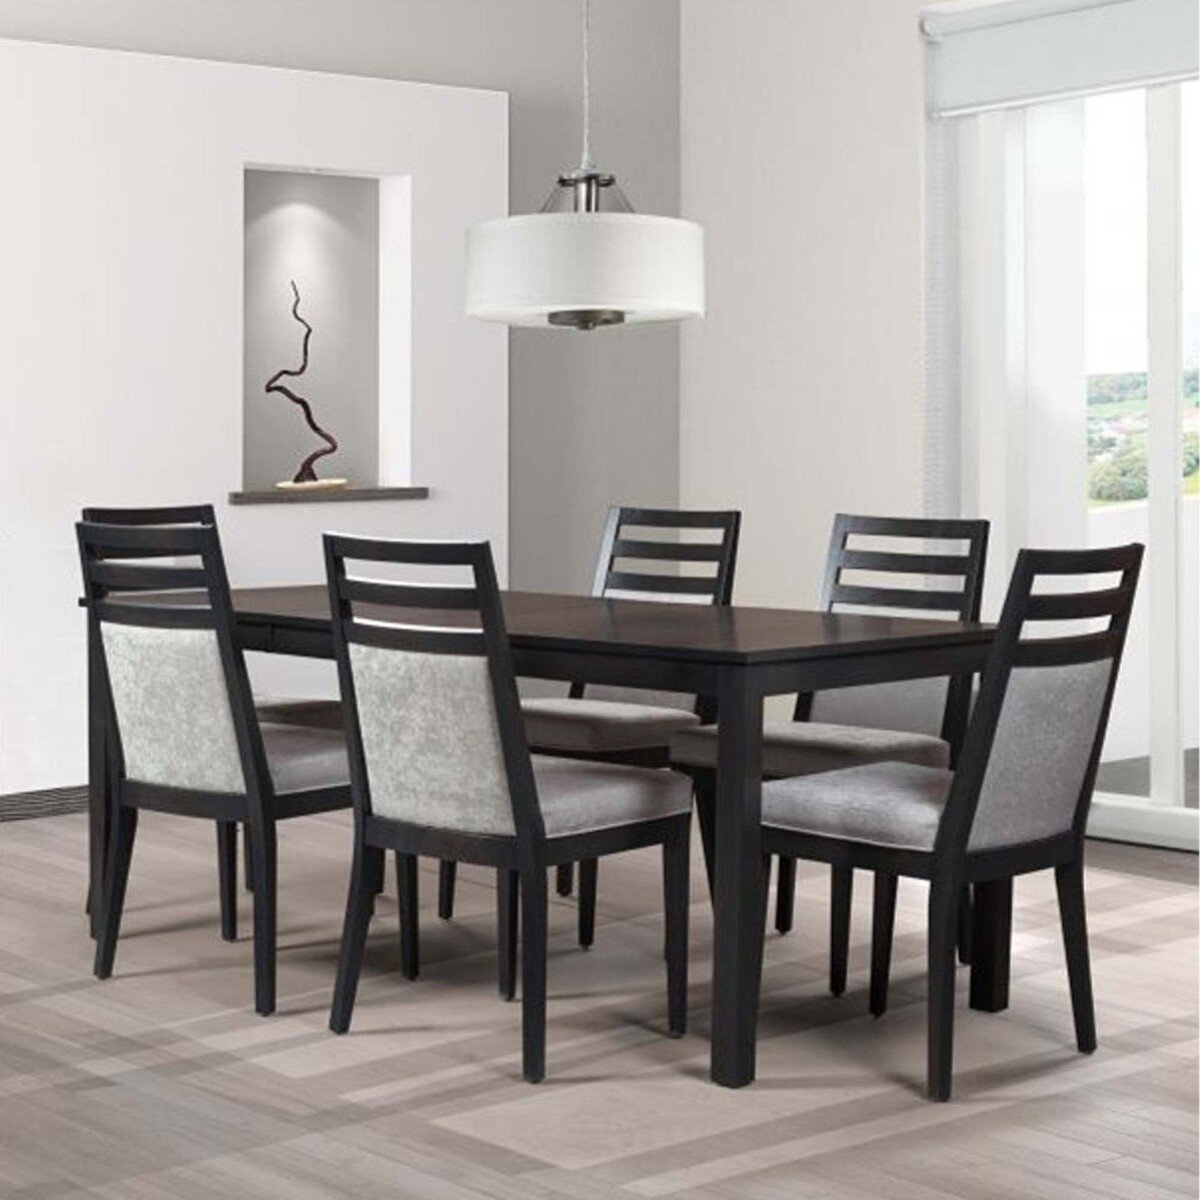 Maple Leaf Wooden Dining Table + 6 Chairs Belot Wenge